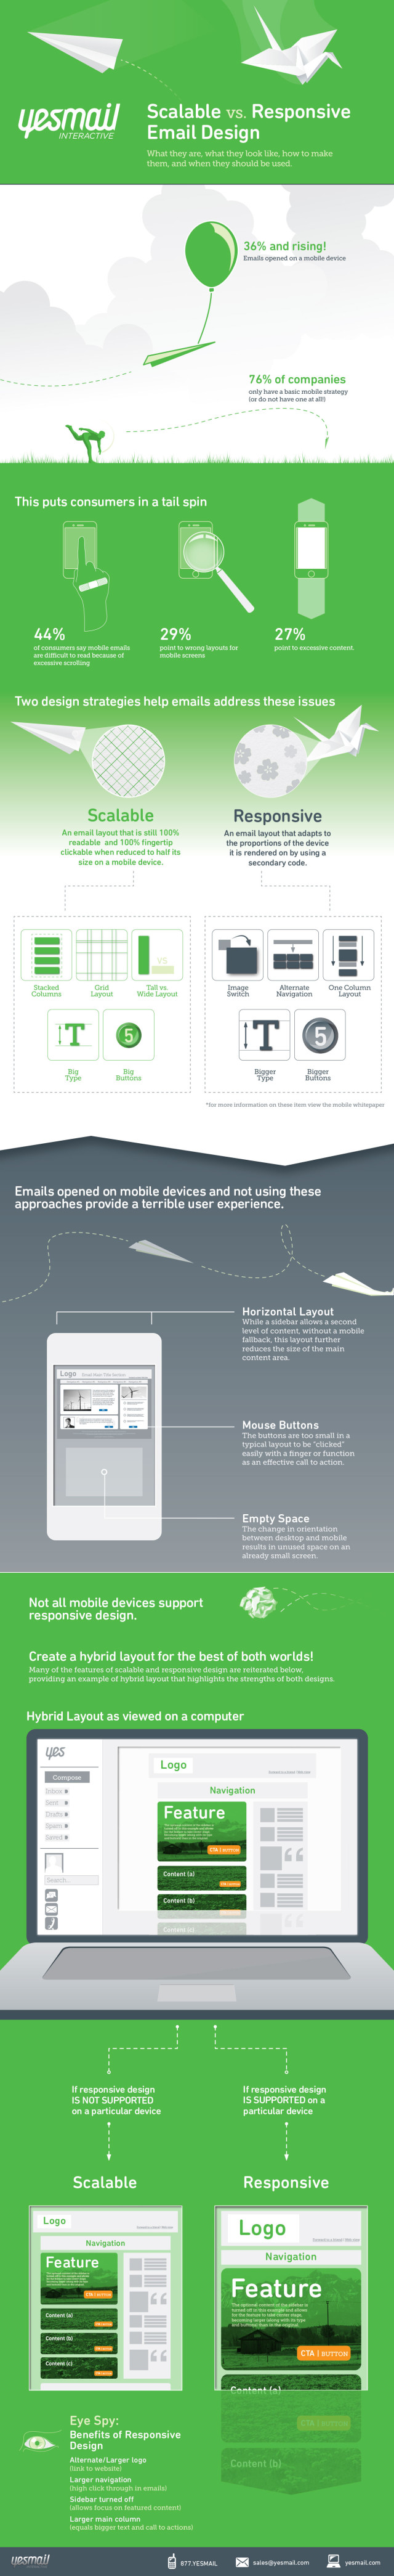 Infographic: responsive and scalable e-mail